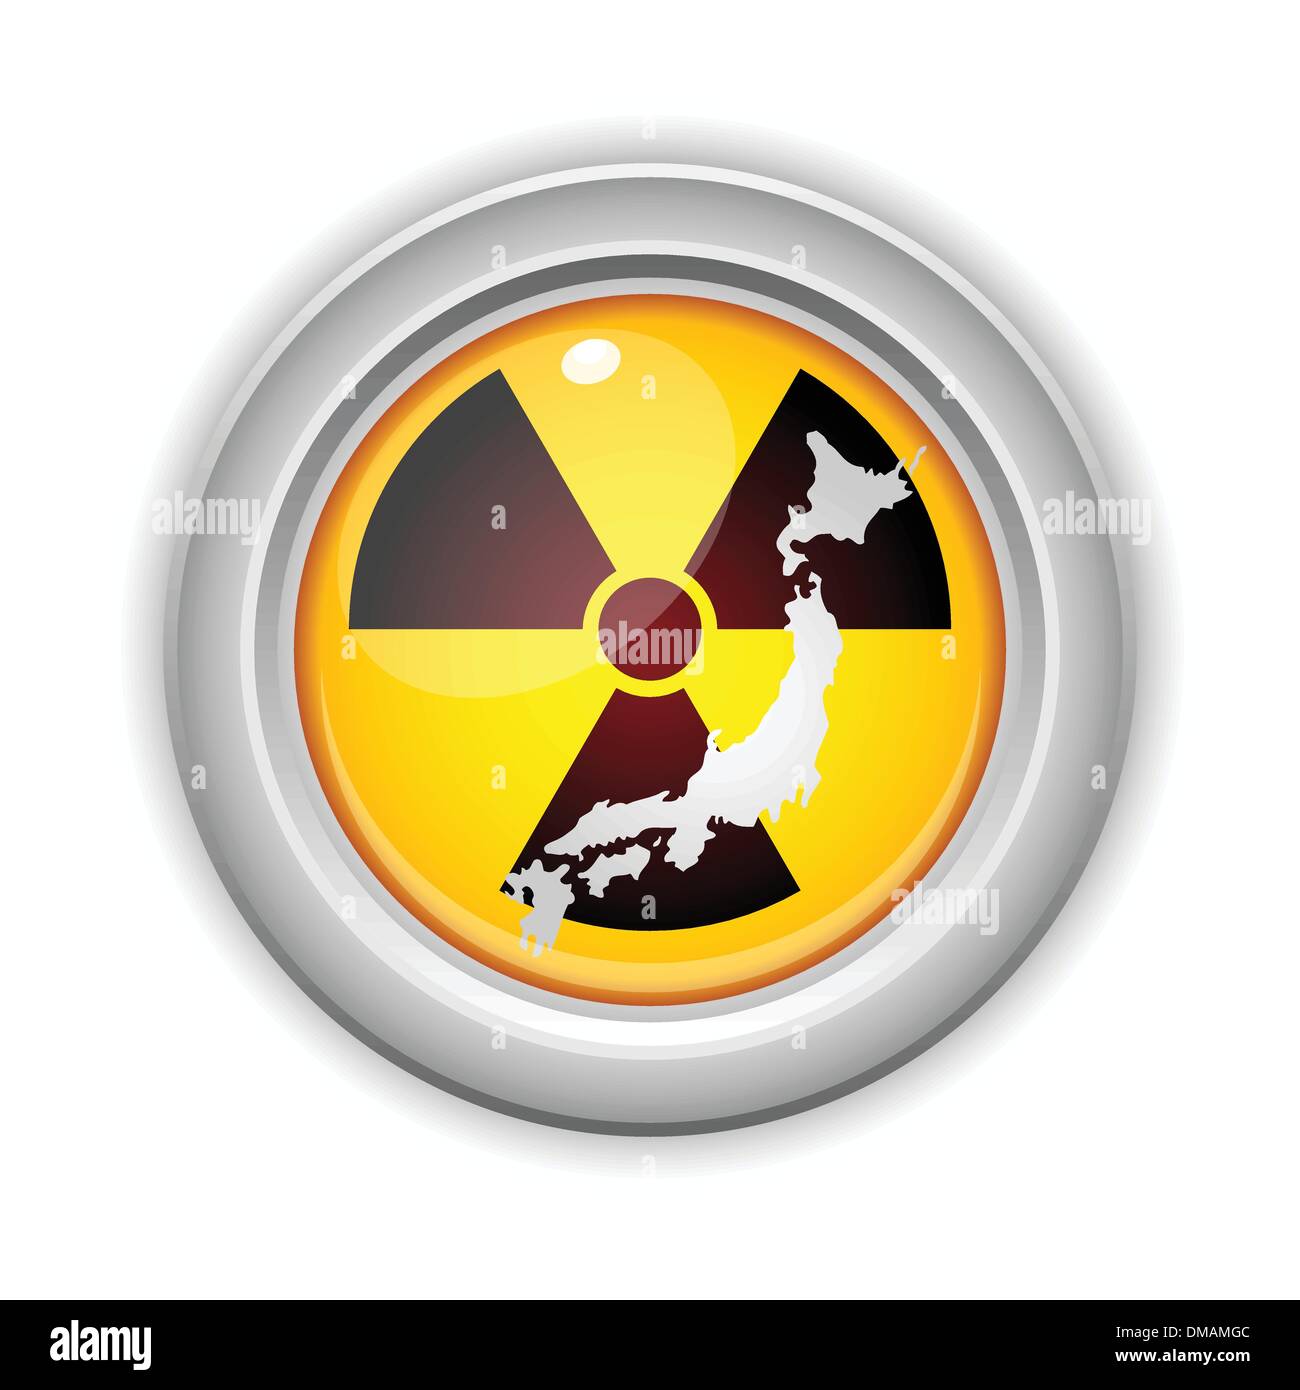 Japan Nuclear Disaster Yellow Button Stock Vector